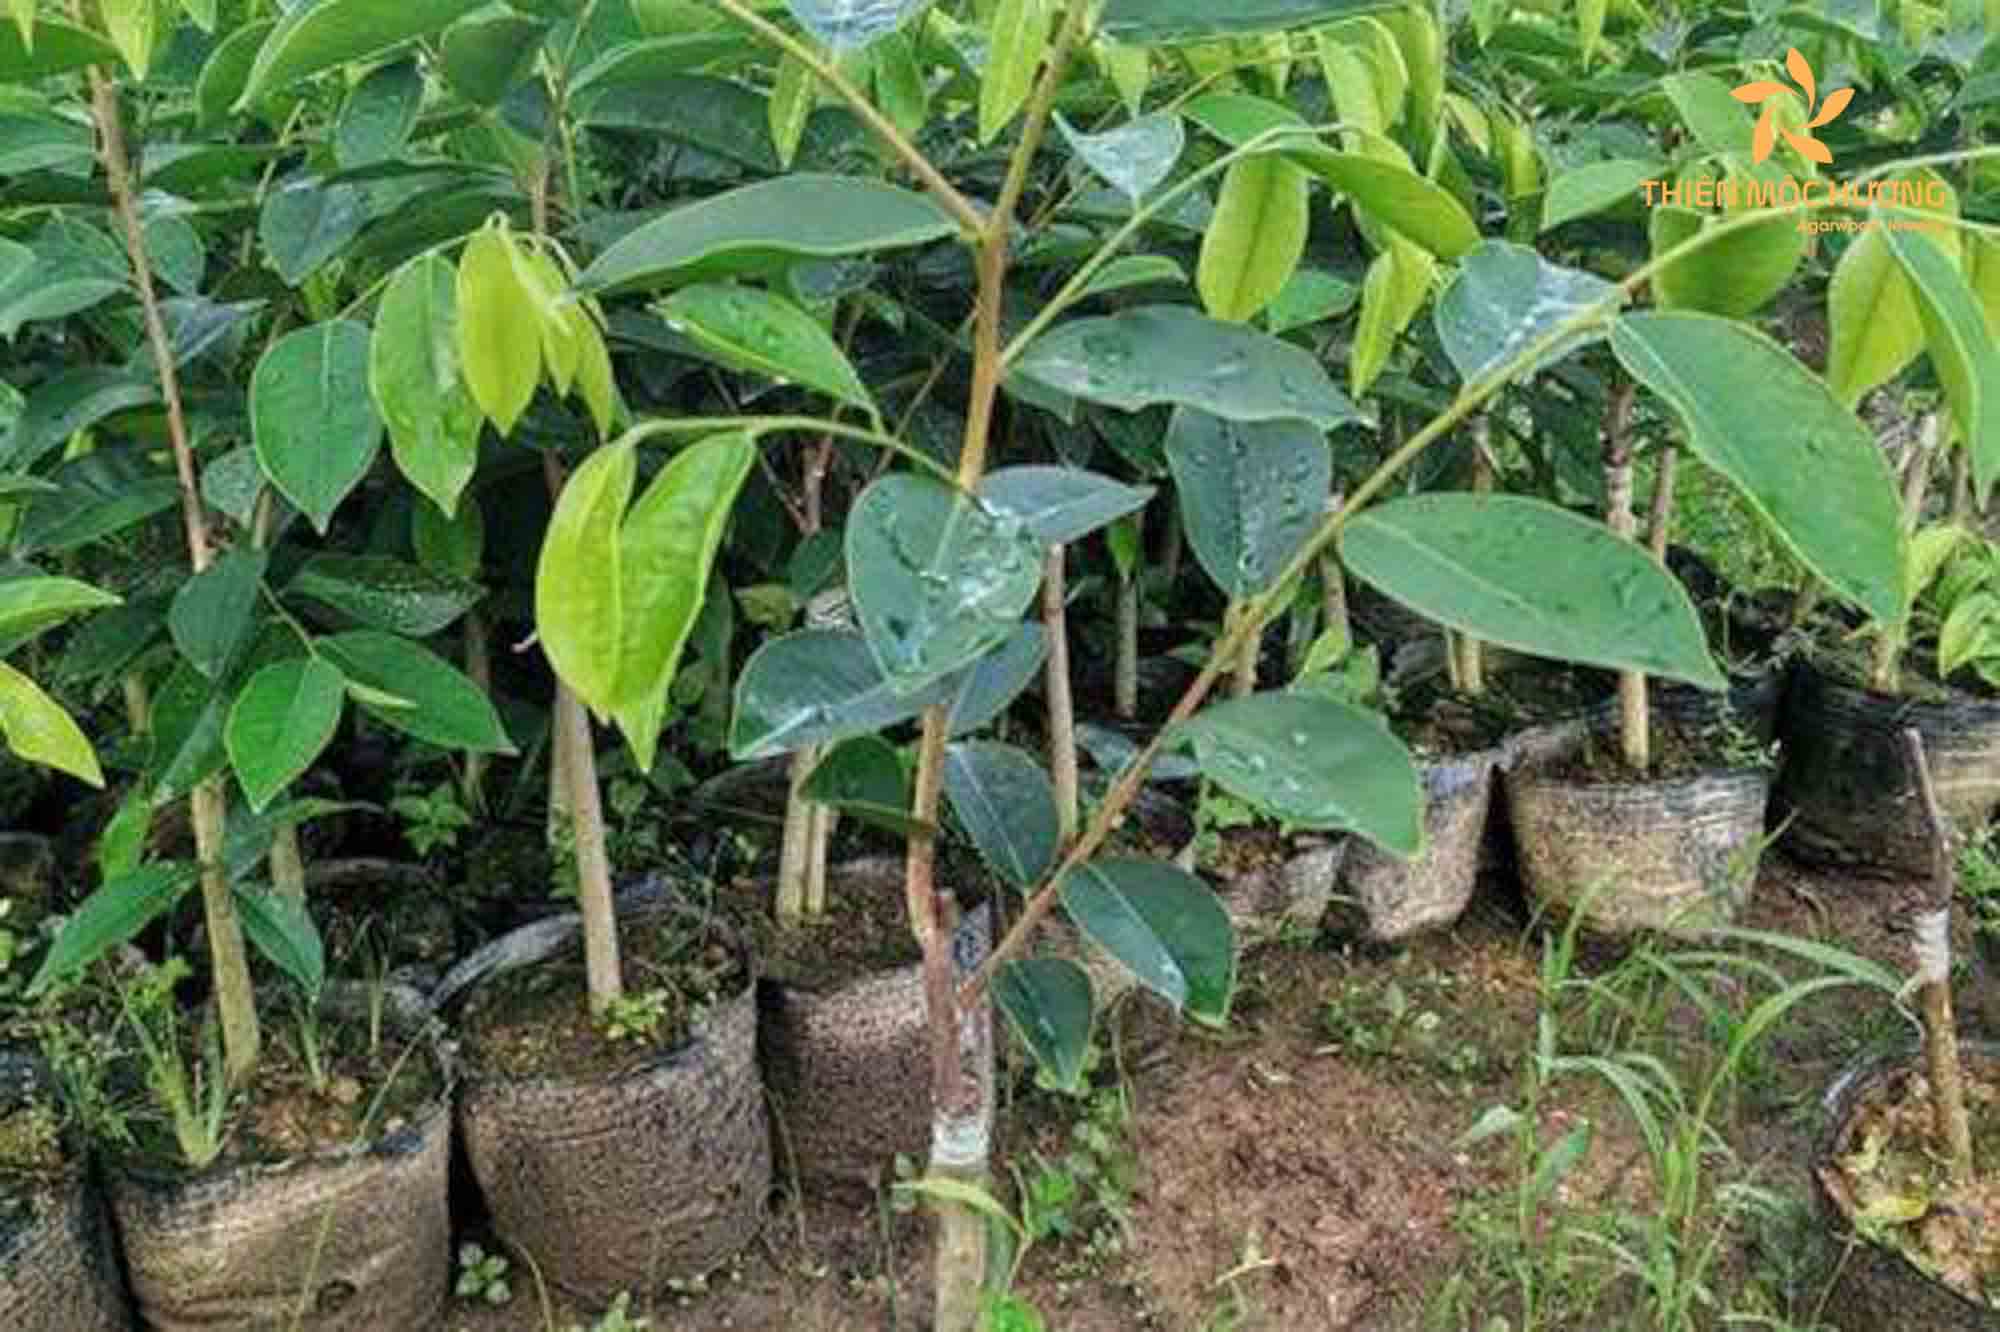 Growth conditions of Agarwood seedlings